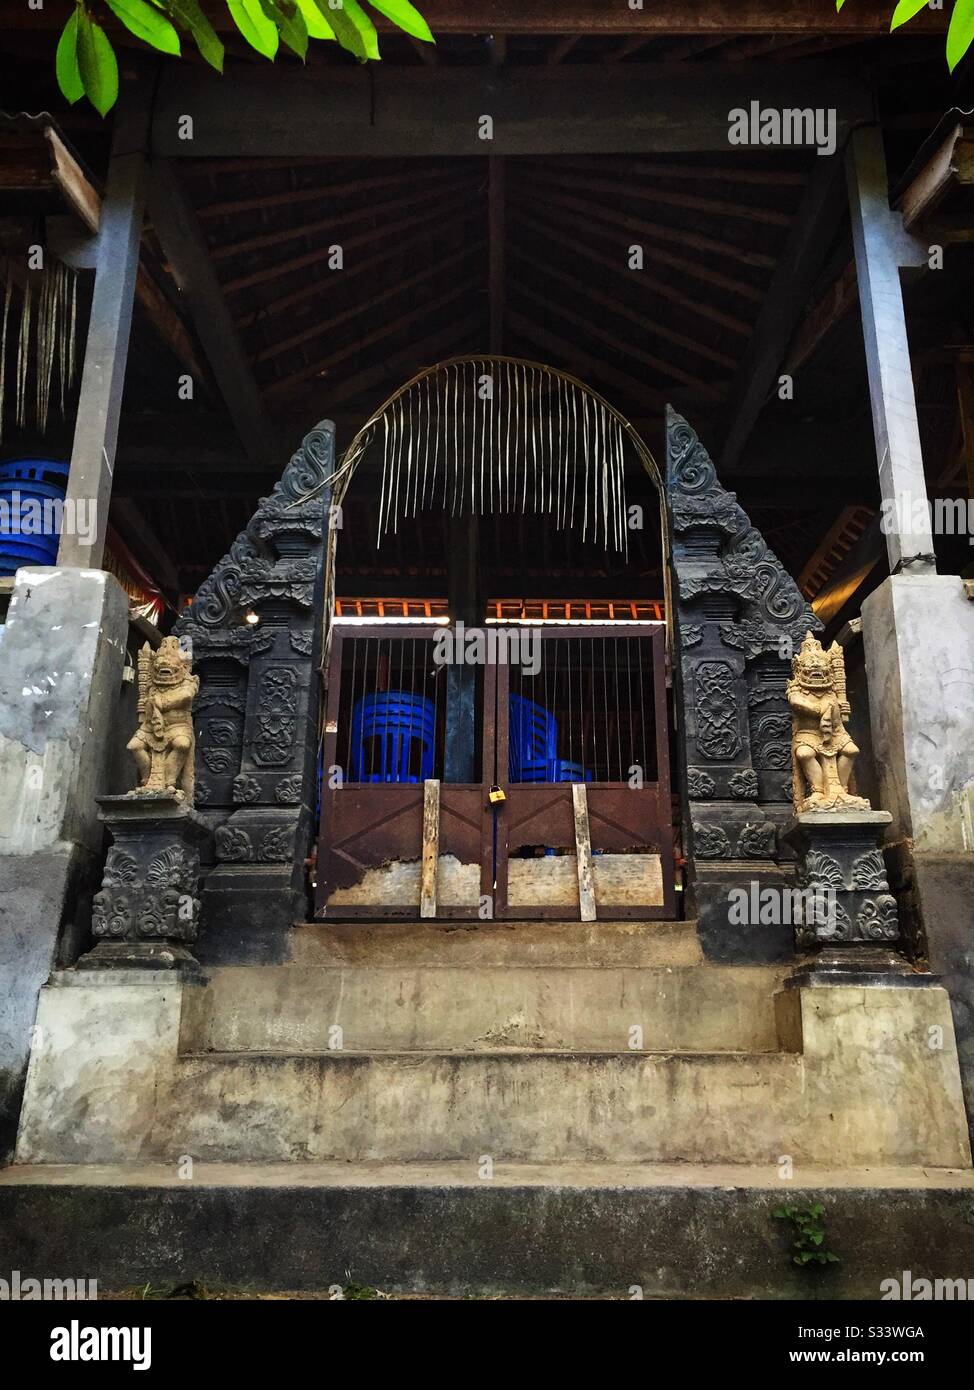 A traditional candi bentar, or split gateway, at the entrance to a community hall, Candidasa, Bali, Indonesia Stock Photo